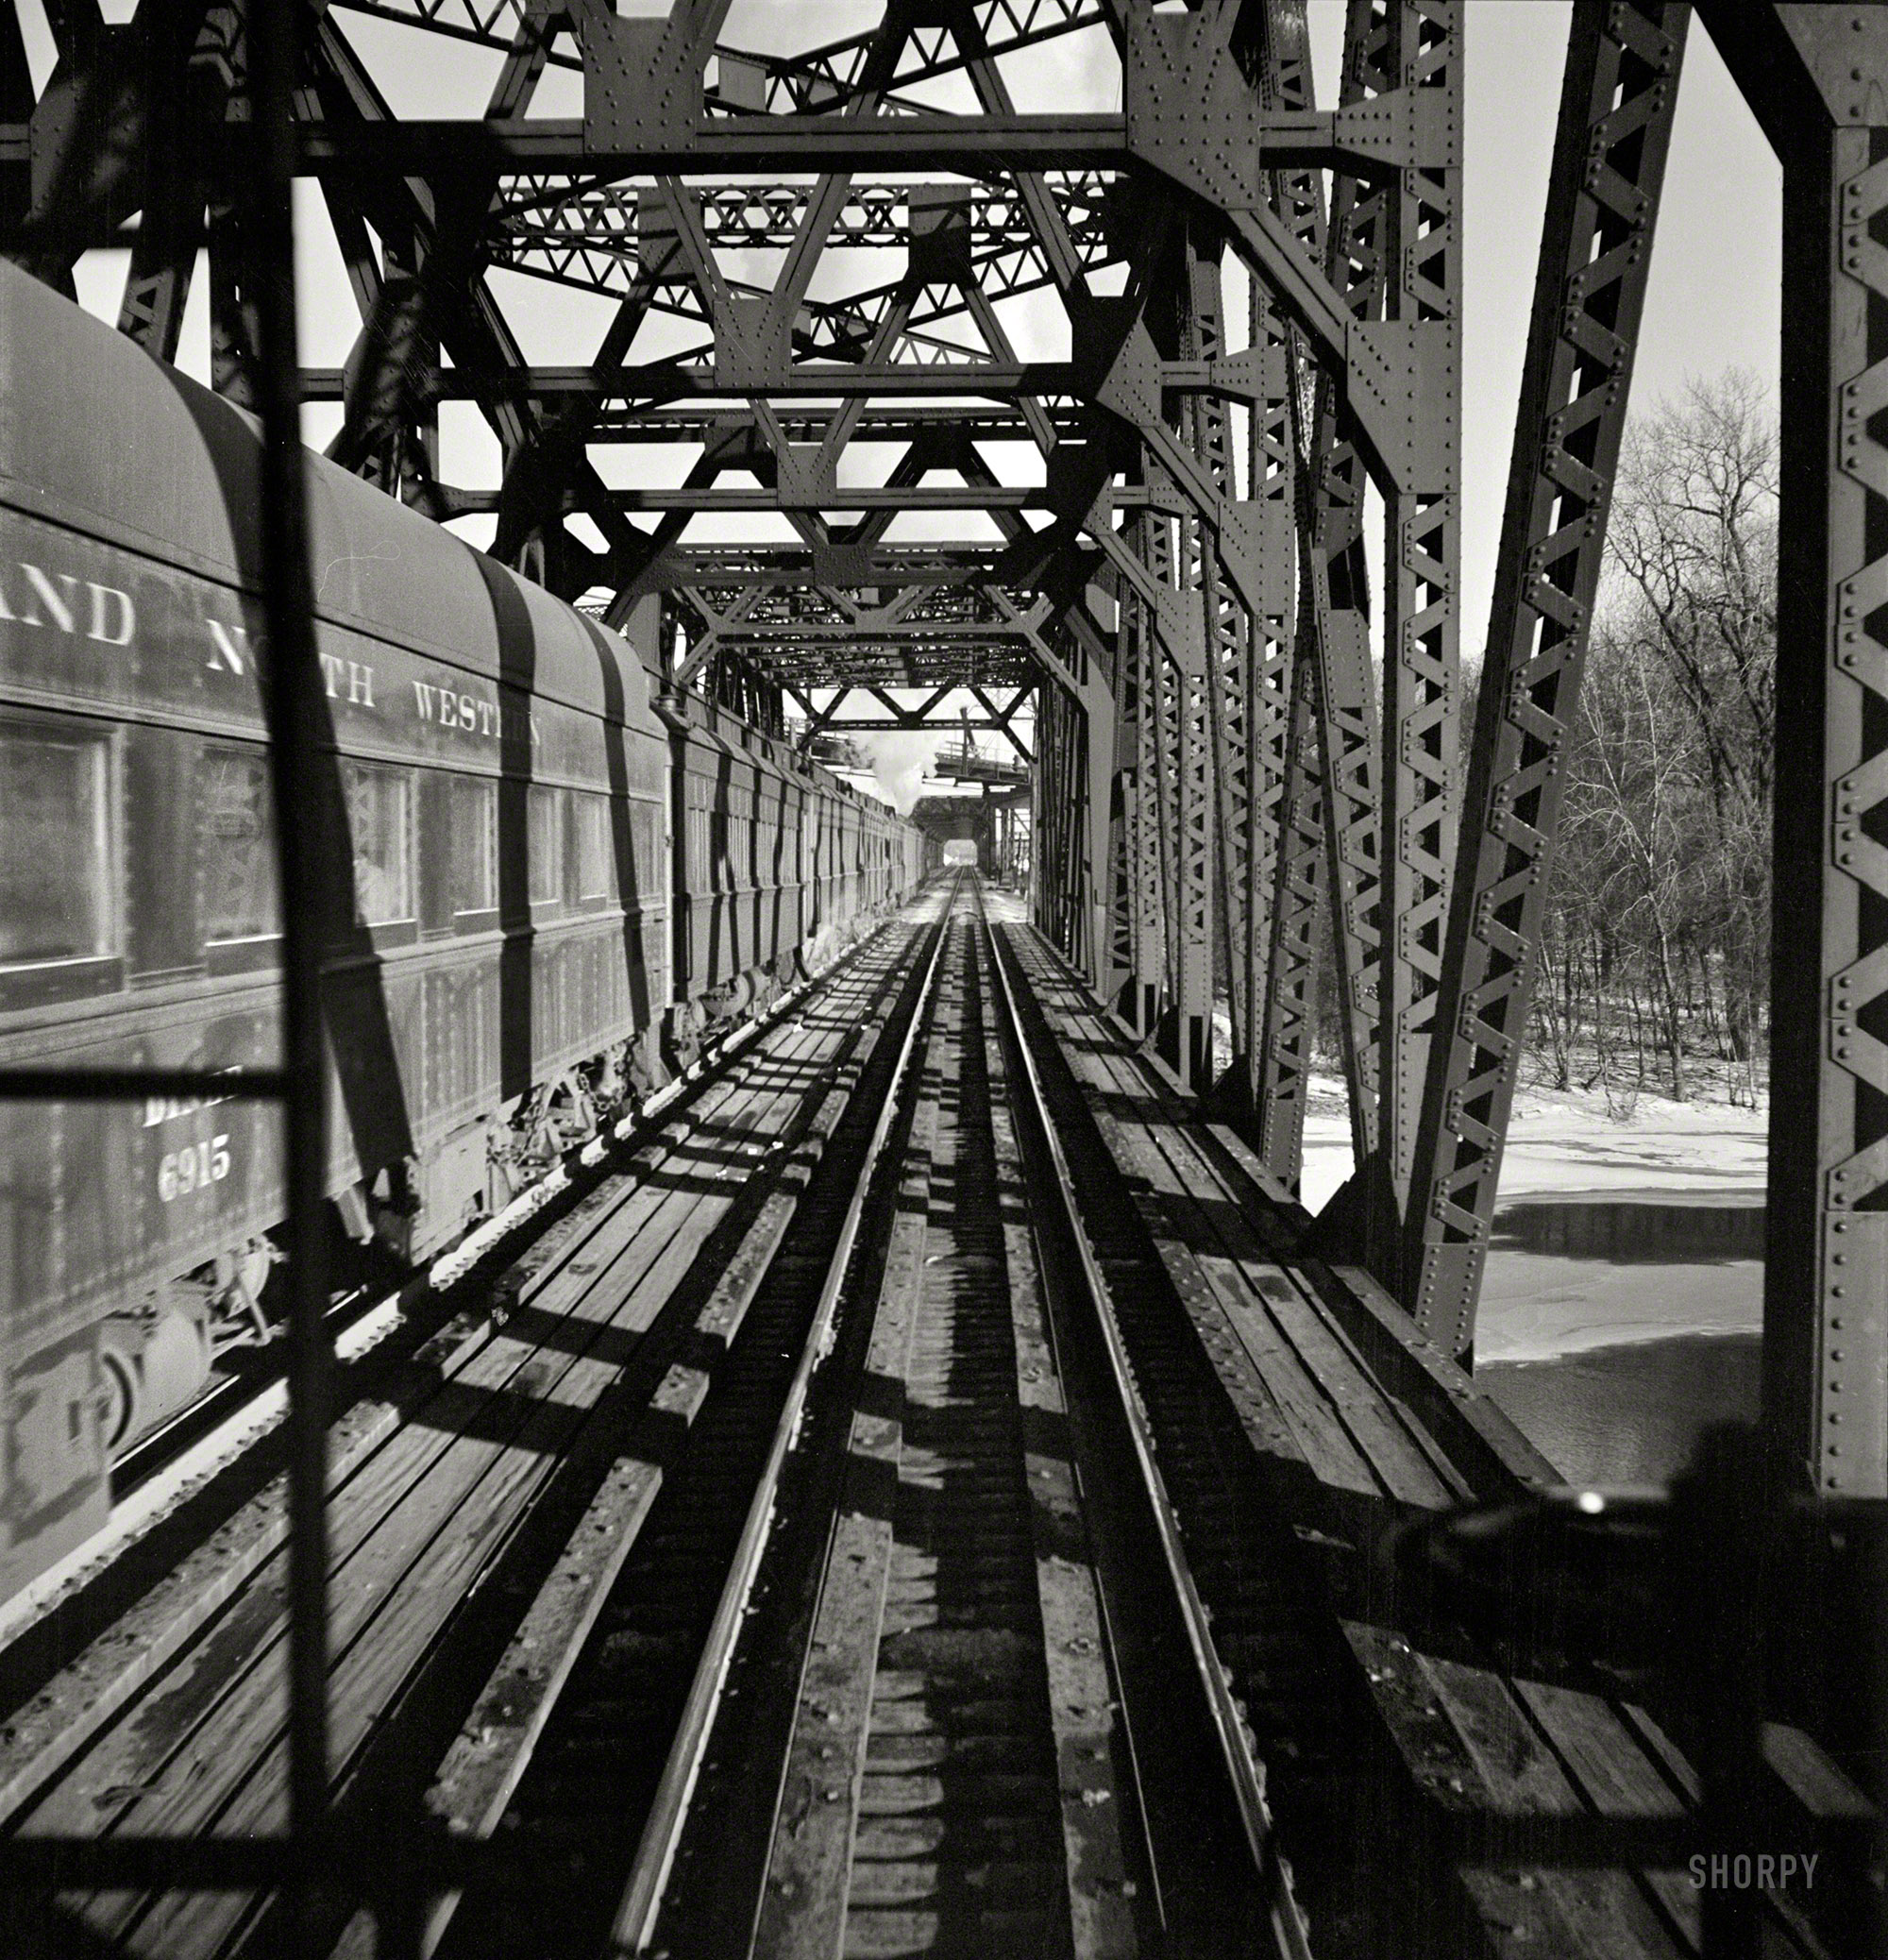 January 1943. "Freight operations on the Chicago & North Western R.R. between Chicago and Clinton, Iowa. The train crosses a long steel bridge." Medium-format negative by Jack Delano for the Office of War Information. View full size.